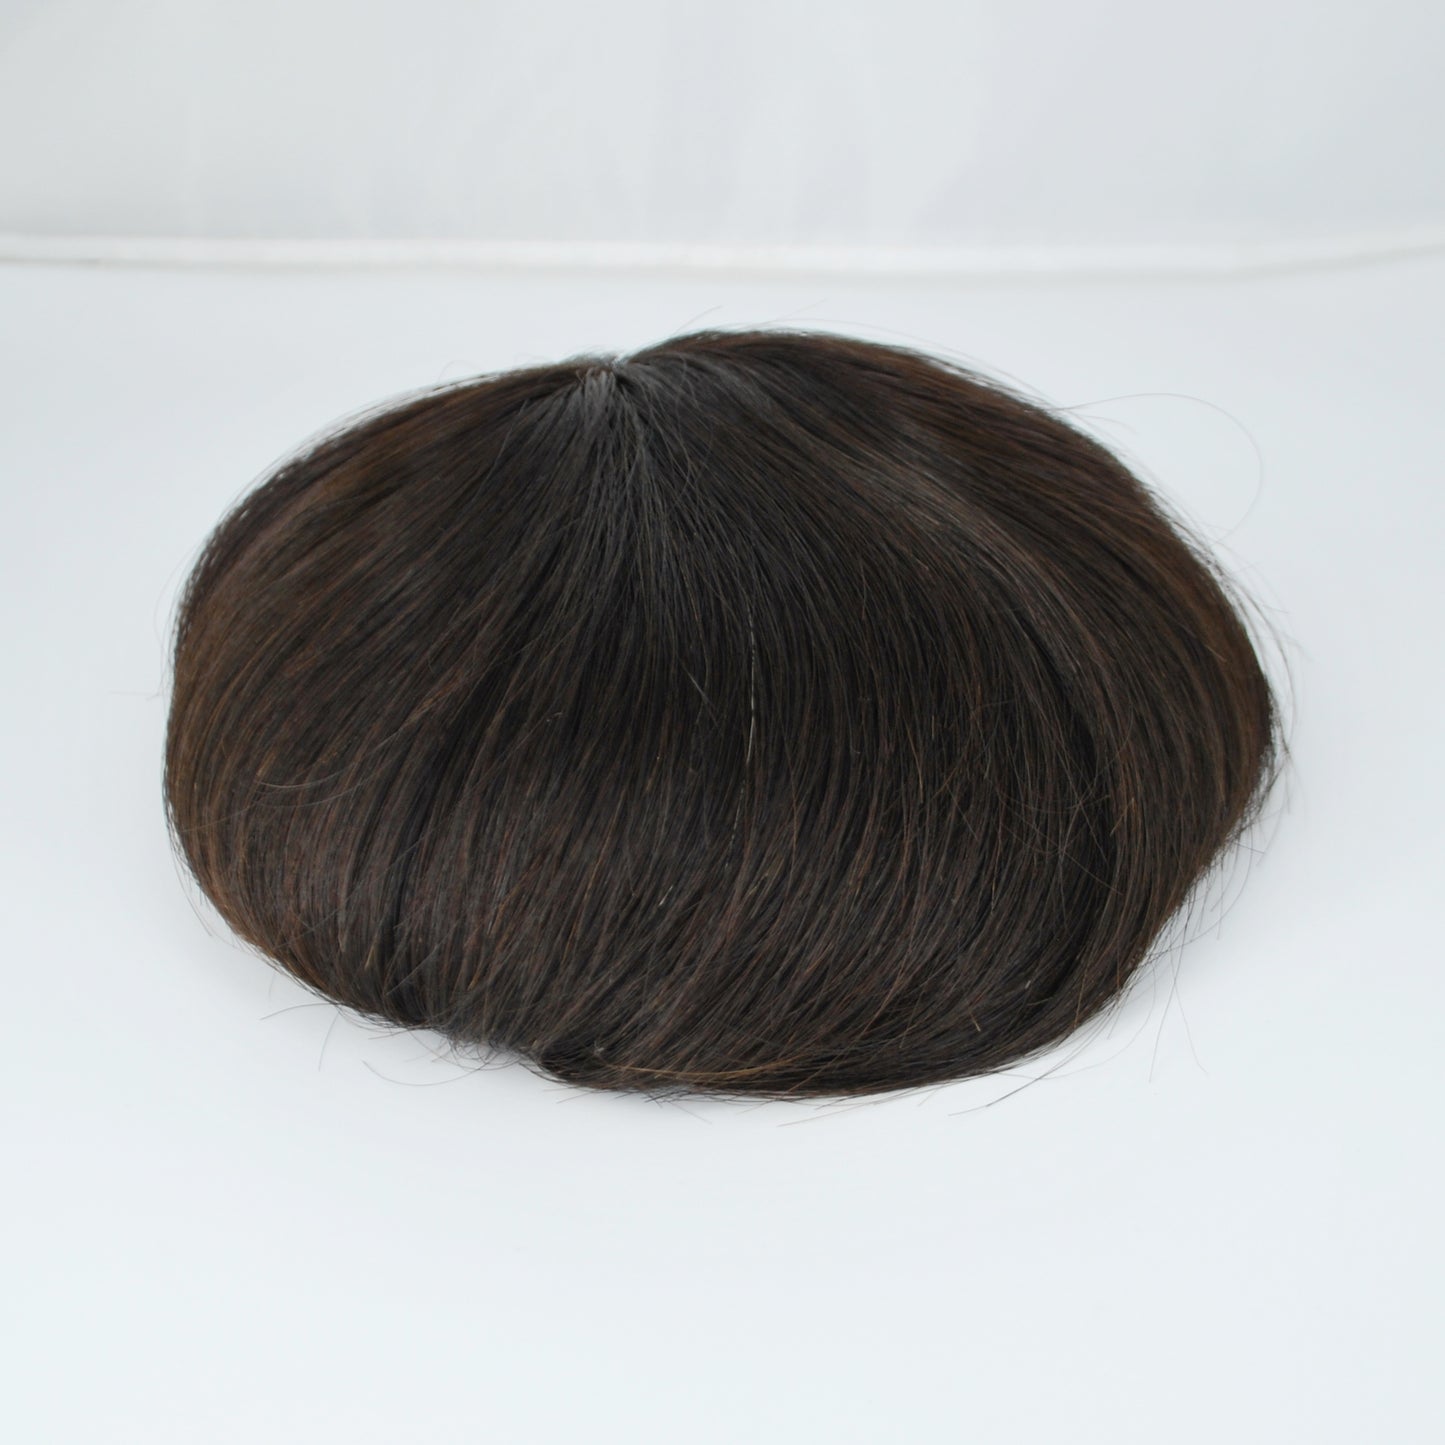 Clearance human hair toupee natural black 7x6.5" prosthesis for men French lace with PU around